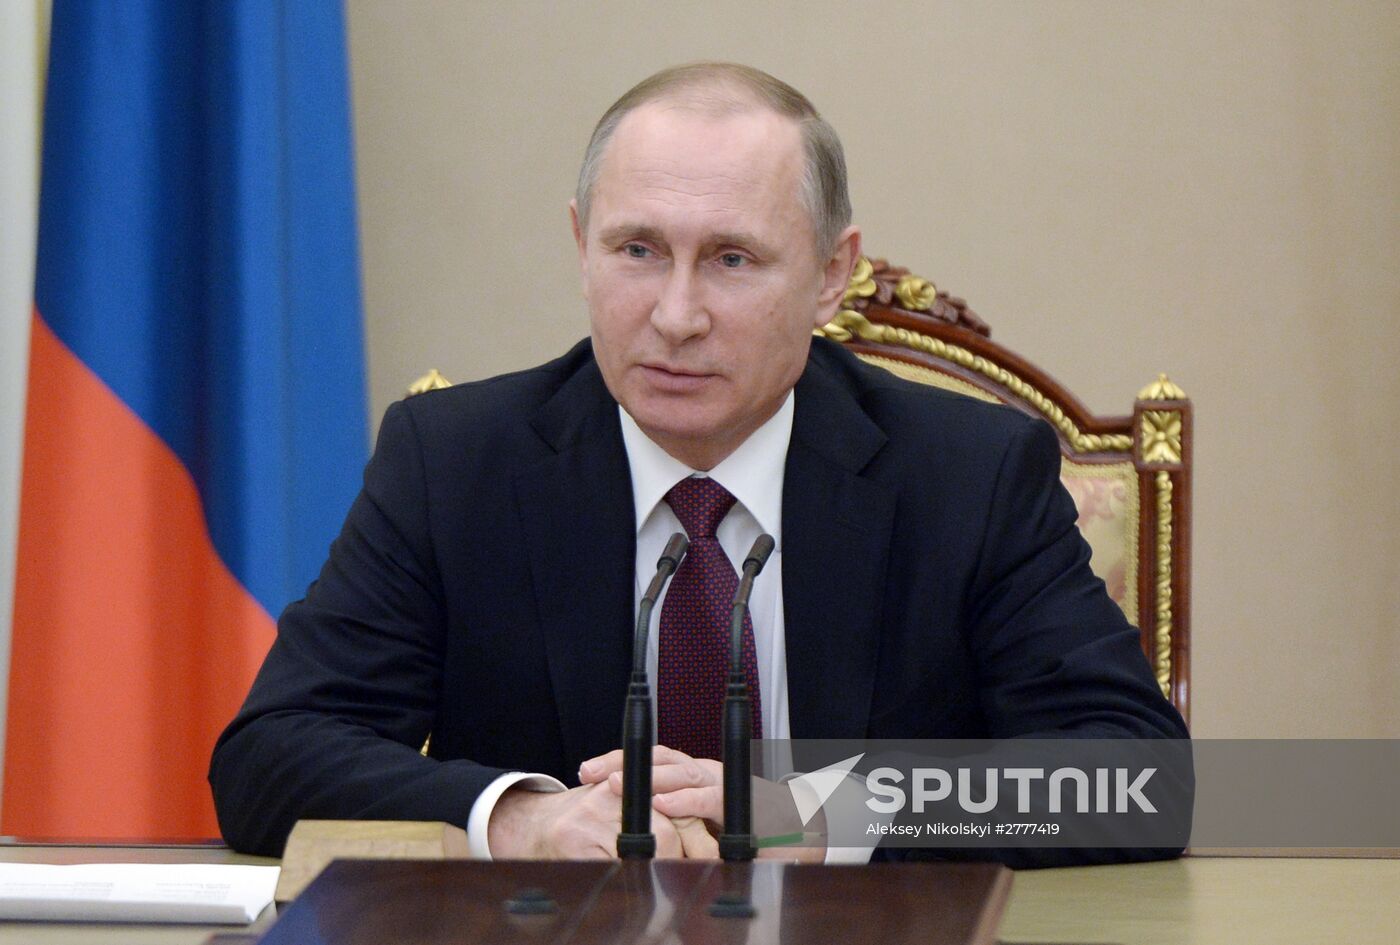 President Putin chairs meeting of Russia's Security Council